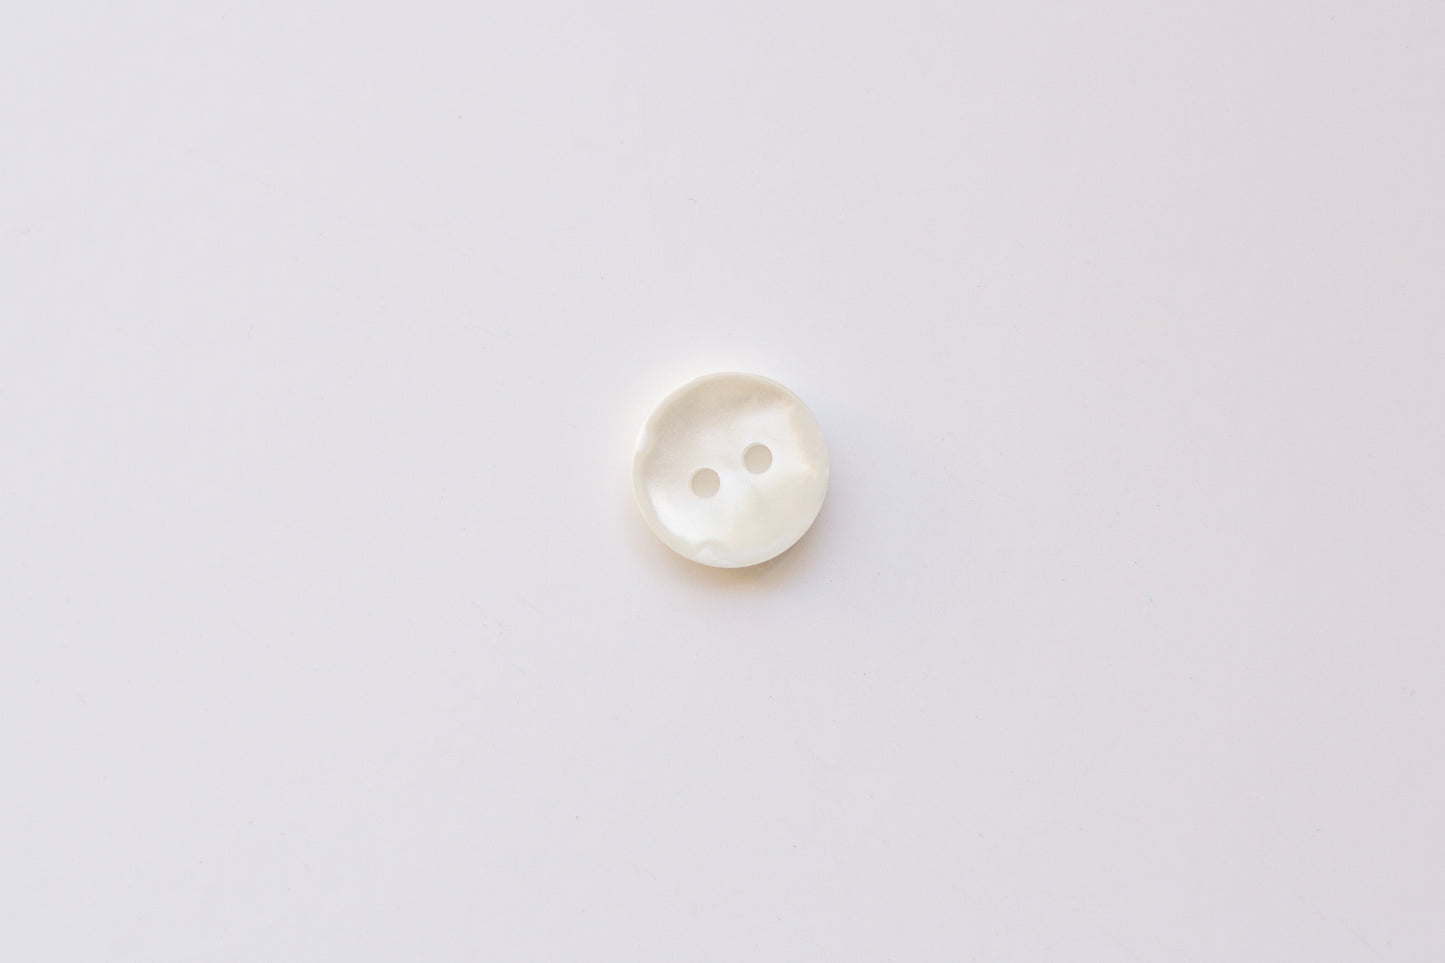 Set of 10 Shirt Buttons - Pearlized White (7/16"/13mm)